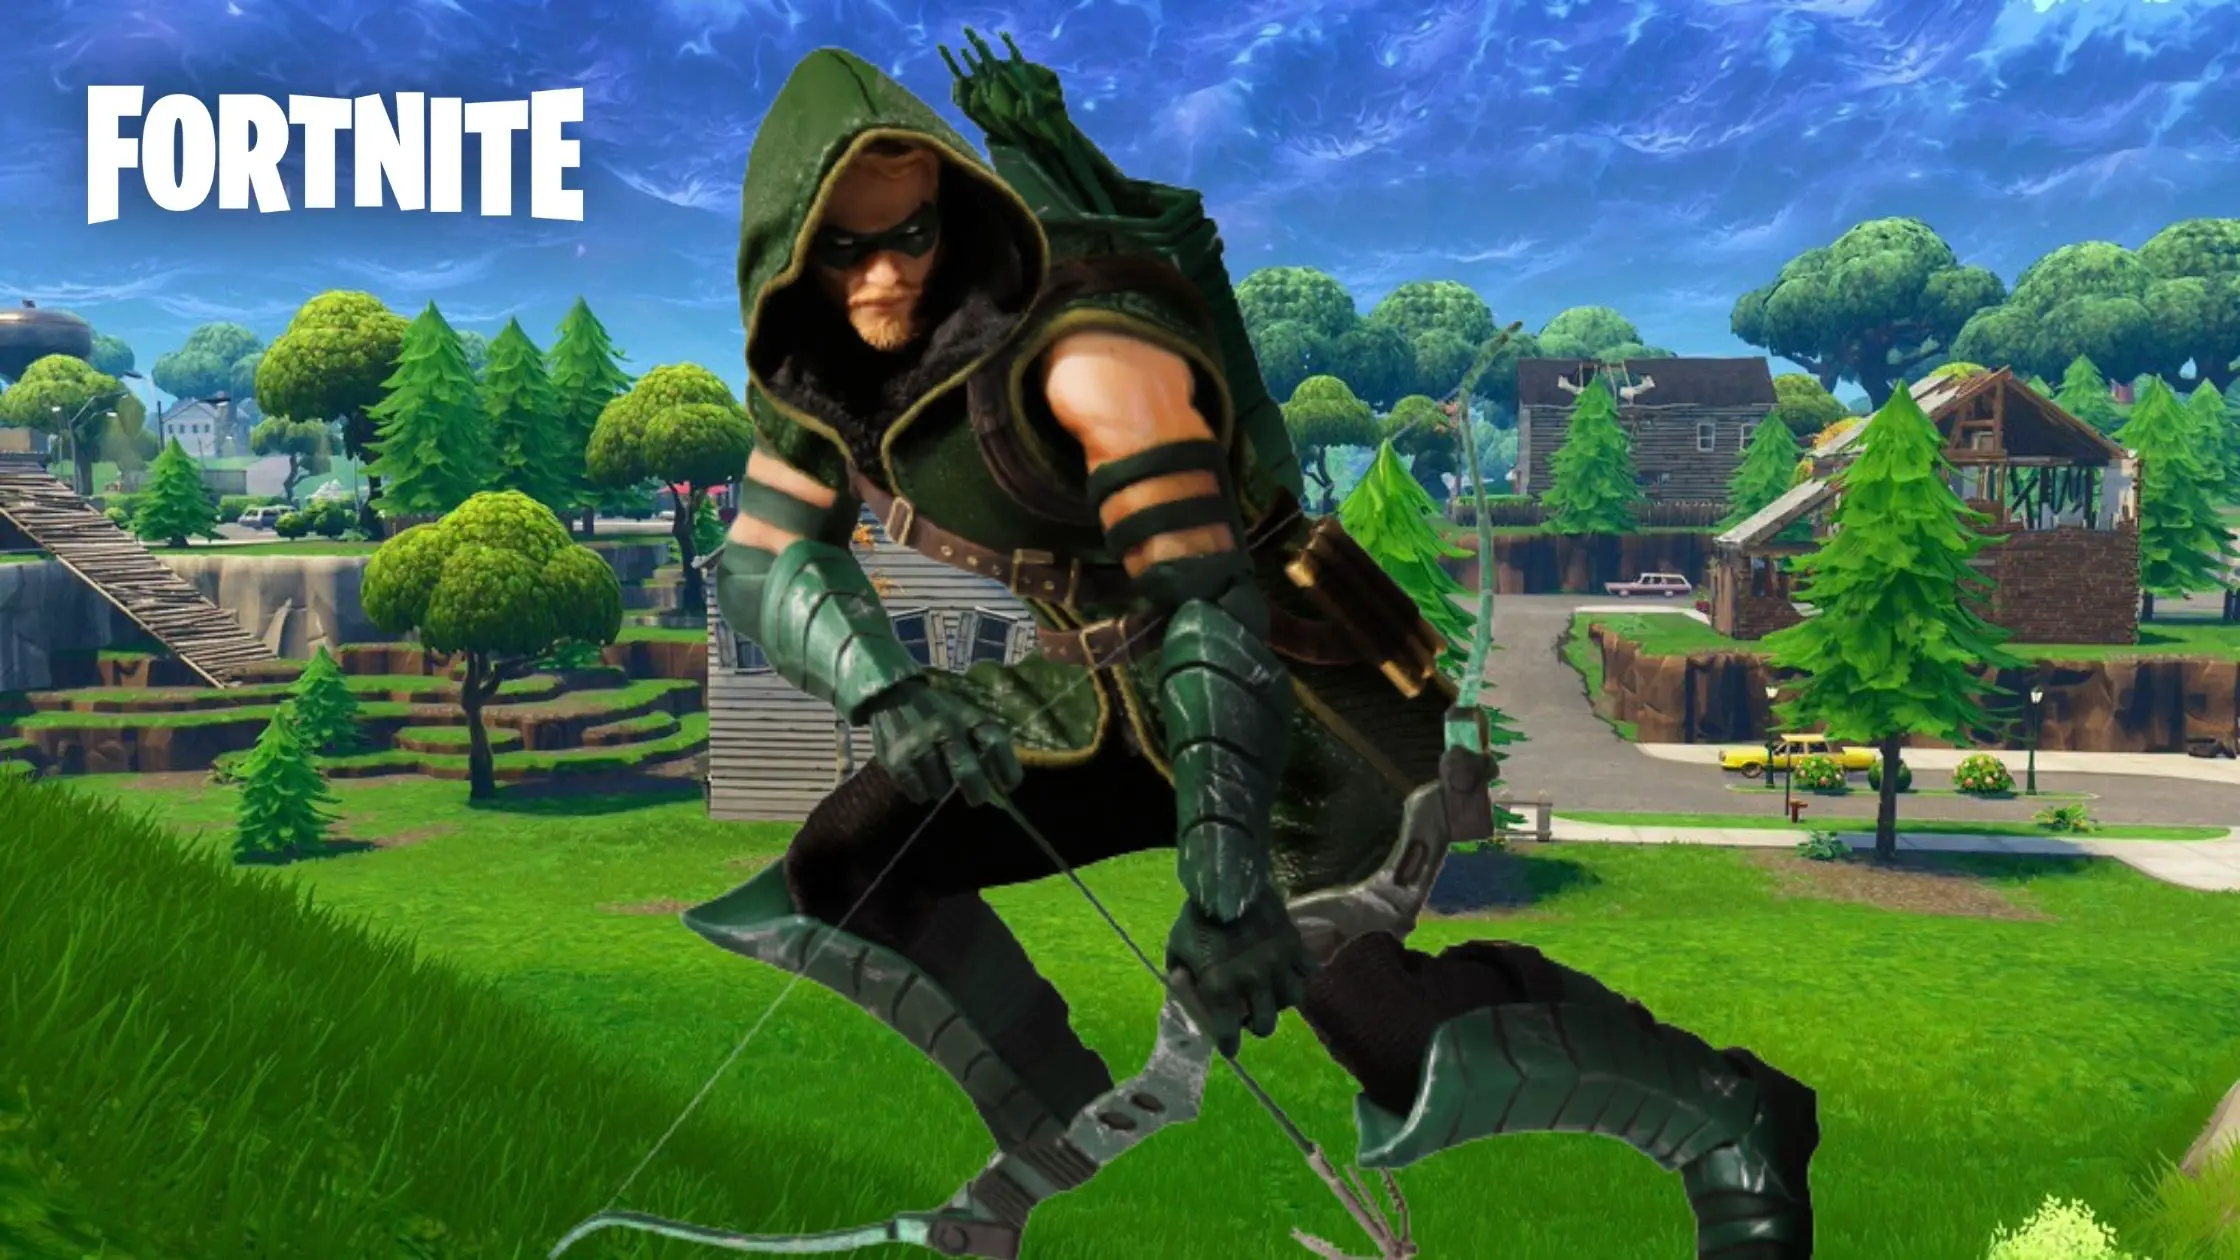 Fortnite Green Arrow Skin Leaked From The Crew Members Pack Here's a full list of all fortnite skins and other cosmetics including dances/emotes, pickaxes, gliders, wraps and more. fortnite green arrow skin leaked from